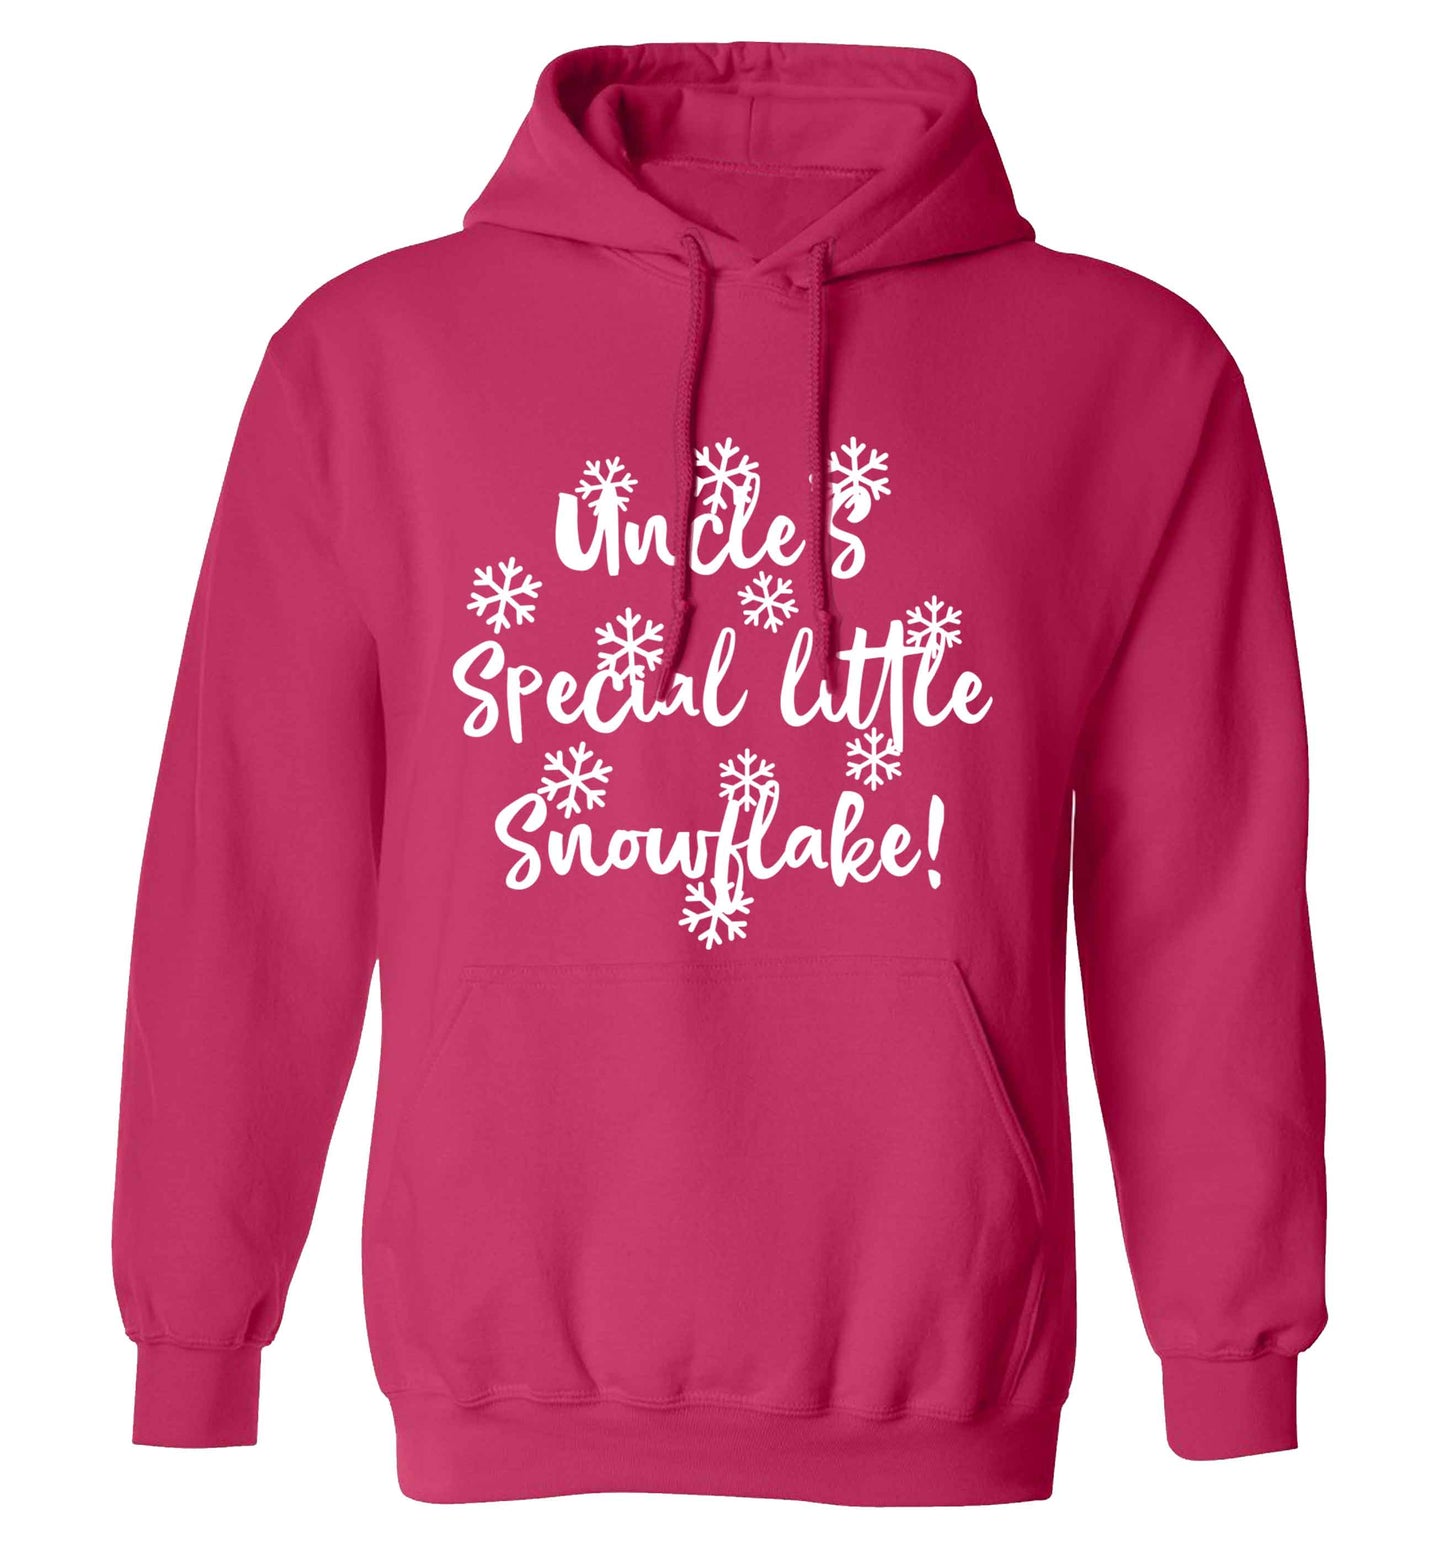 Uncle's special little snowflake adults unisex pink hoodie 2XL